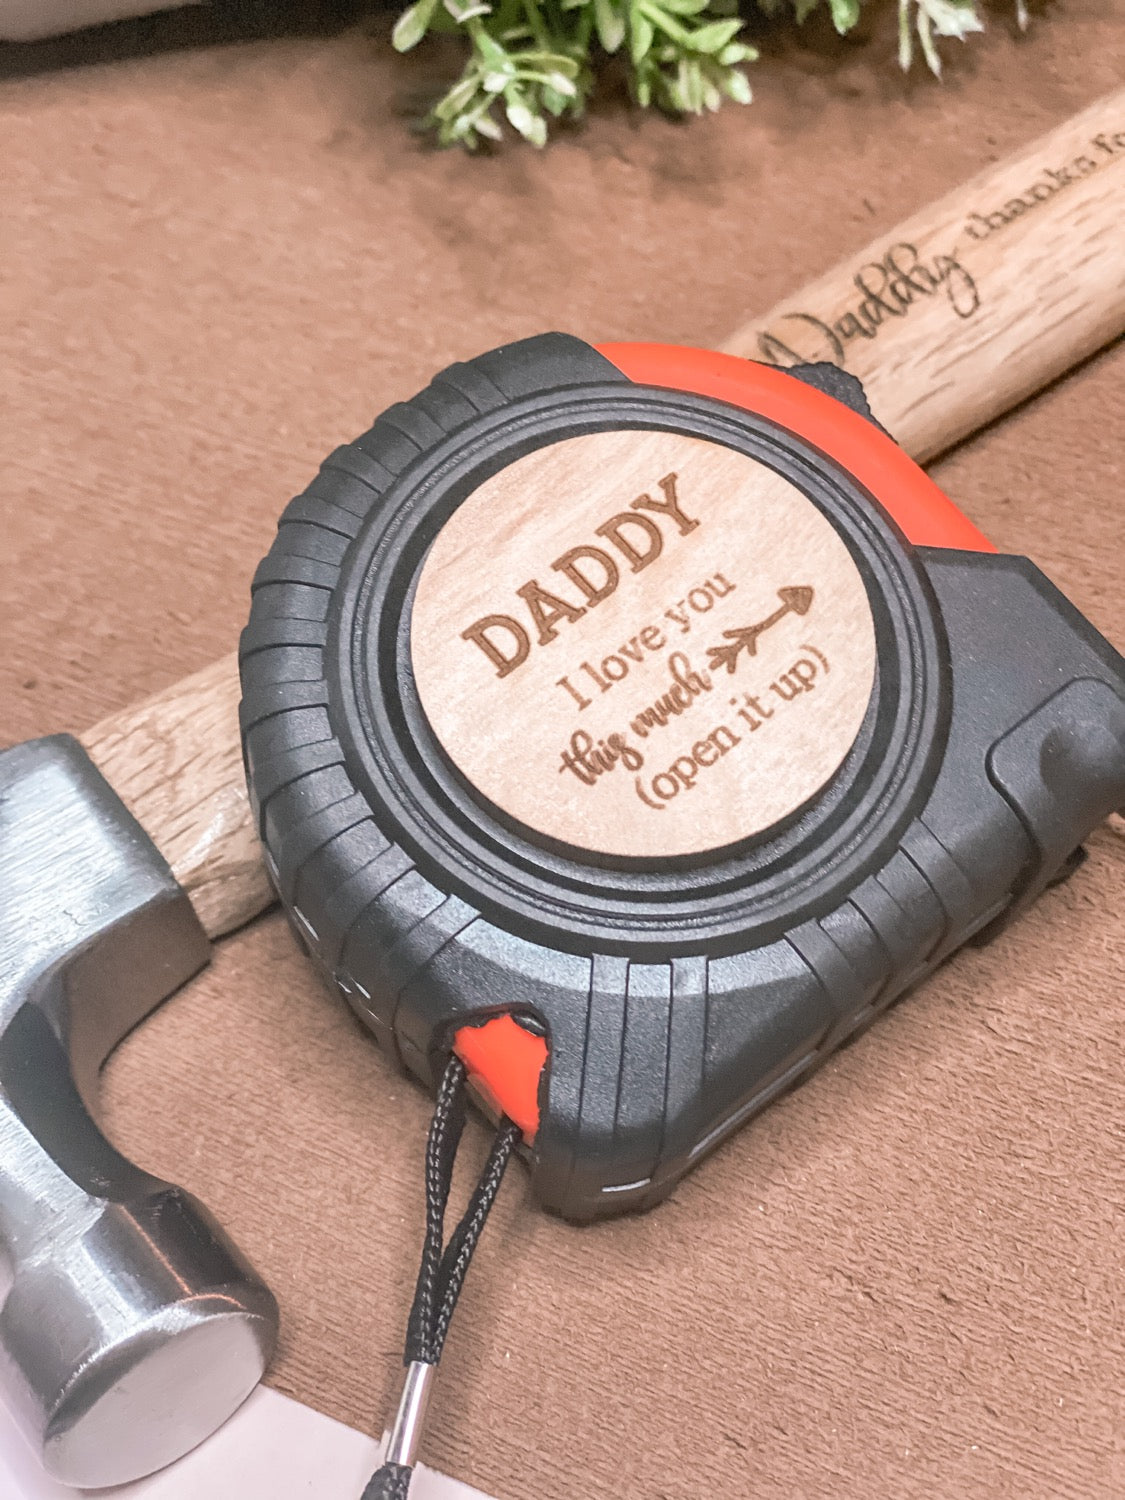 Personalized Father's Day Gift - personalized measuring tape with